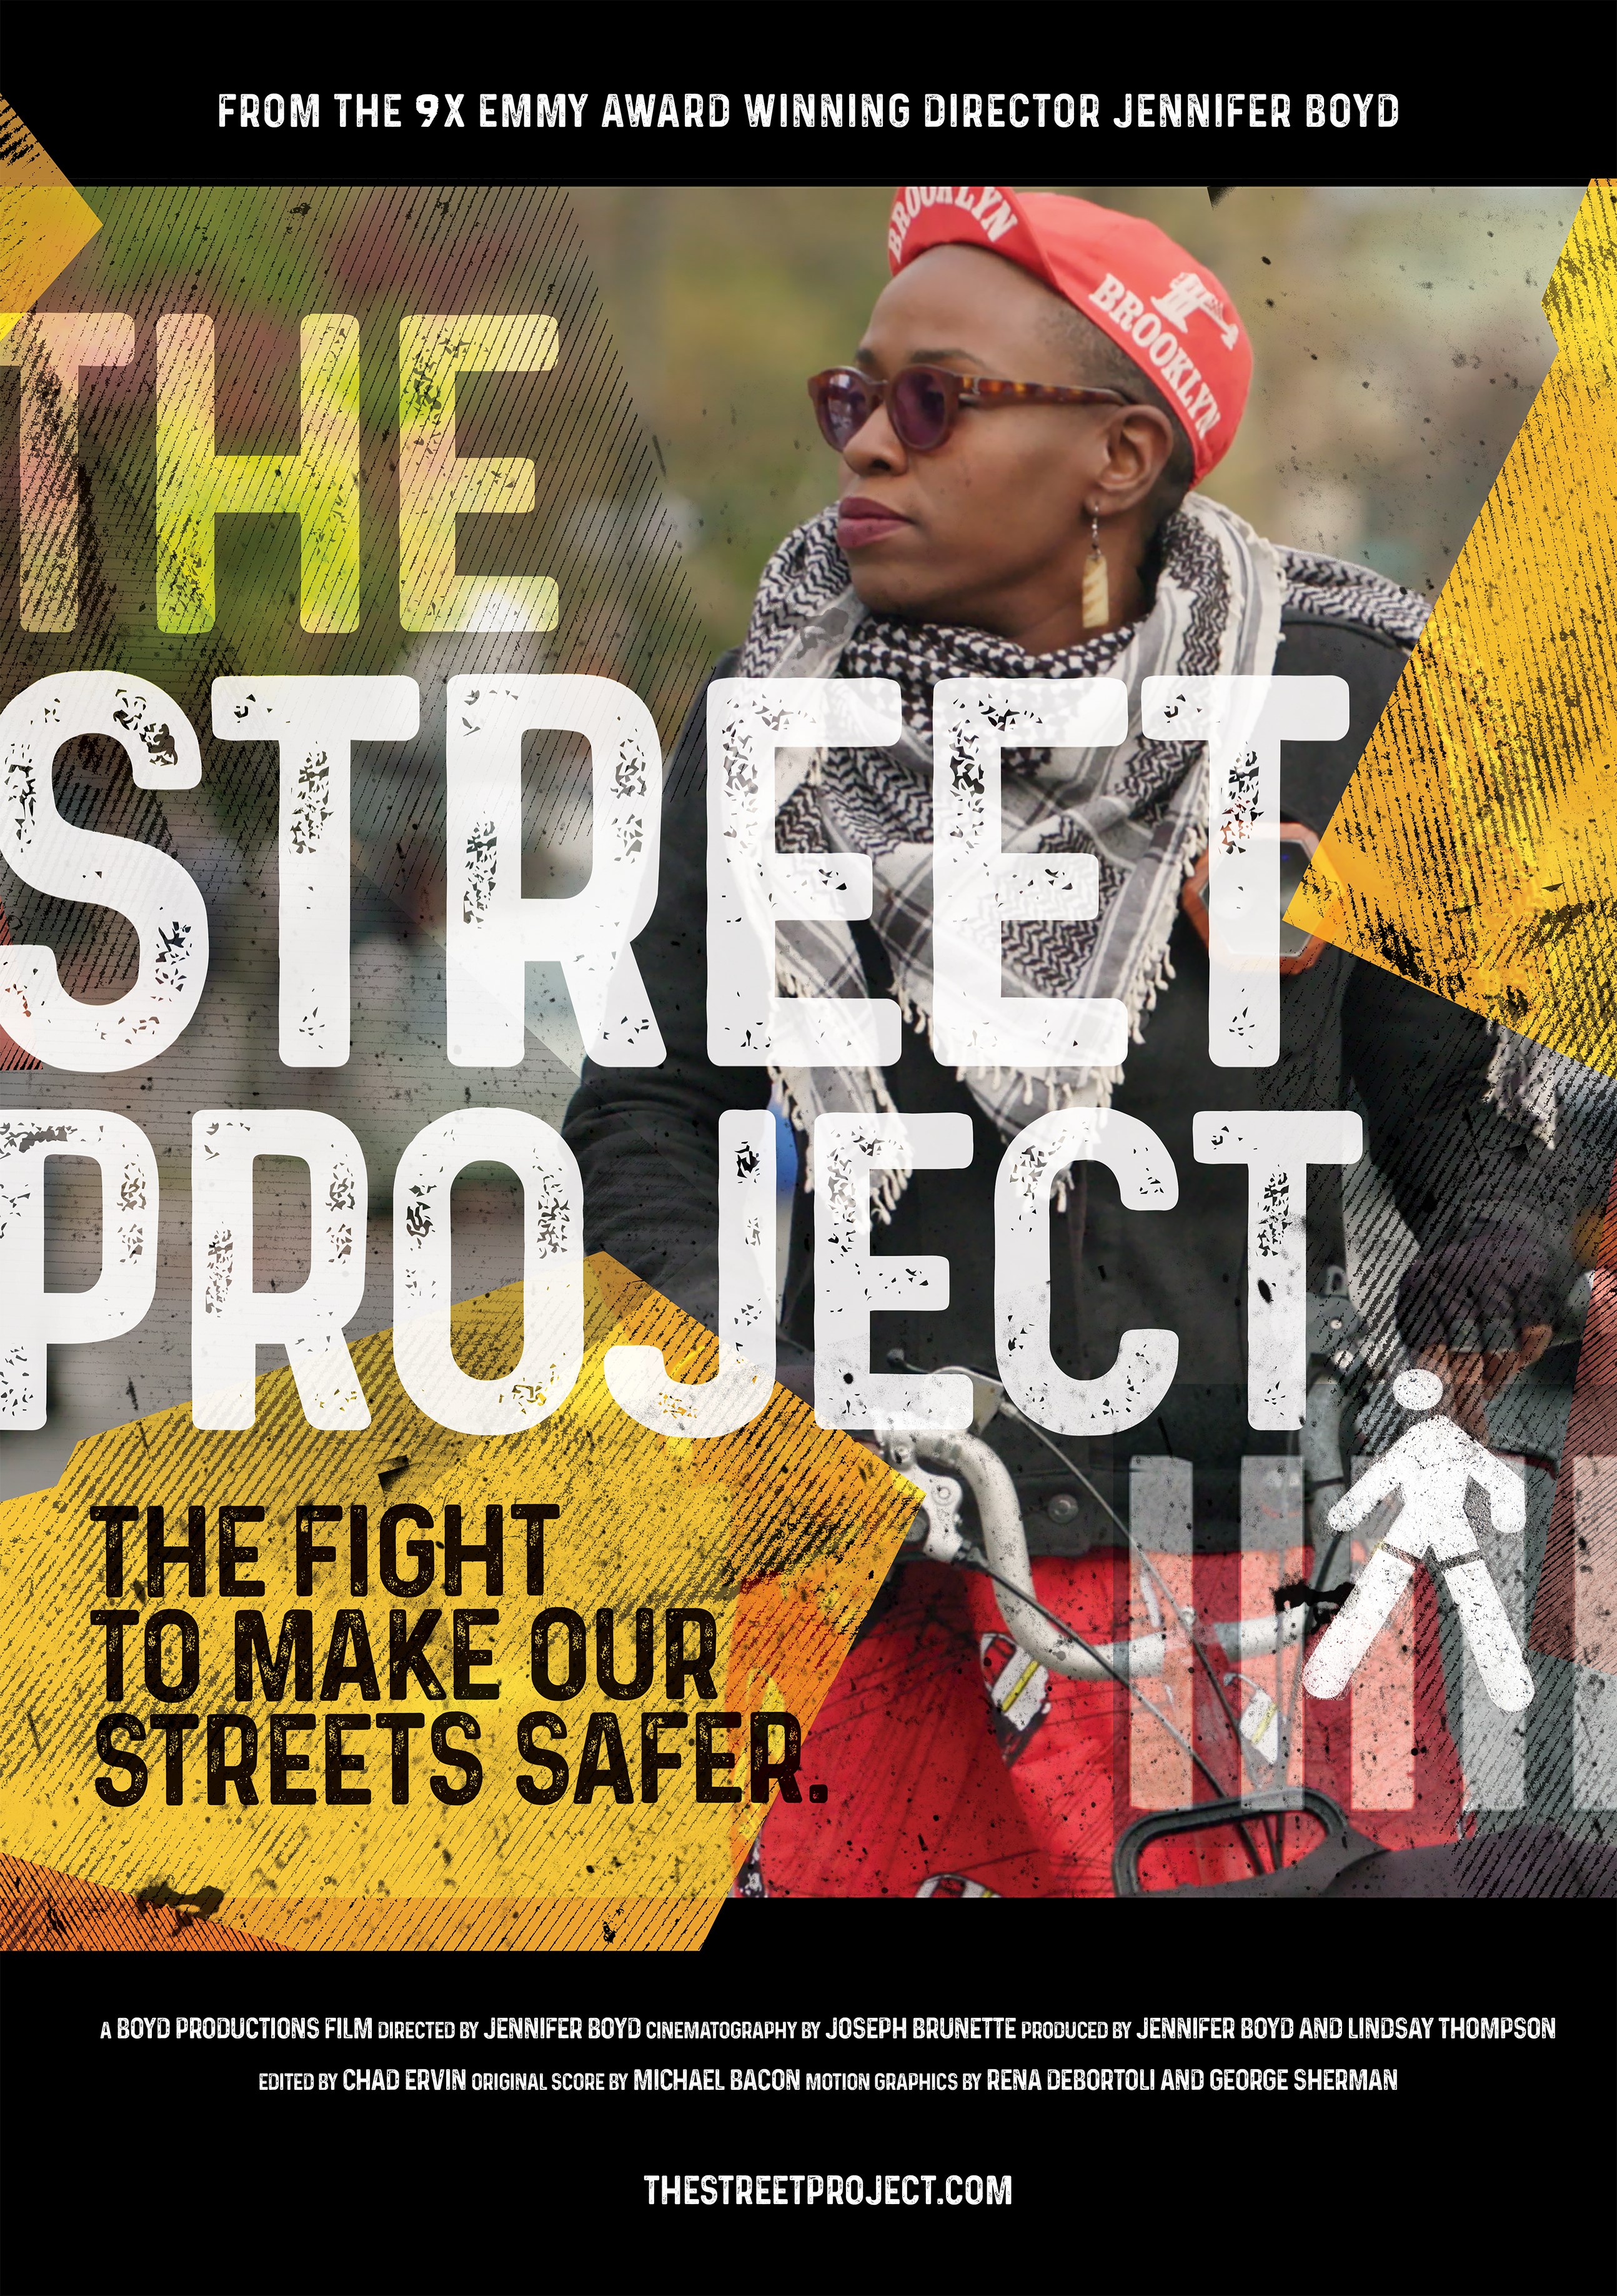 The Street Project documentary